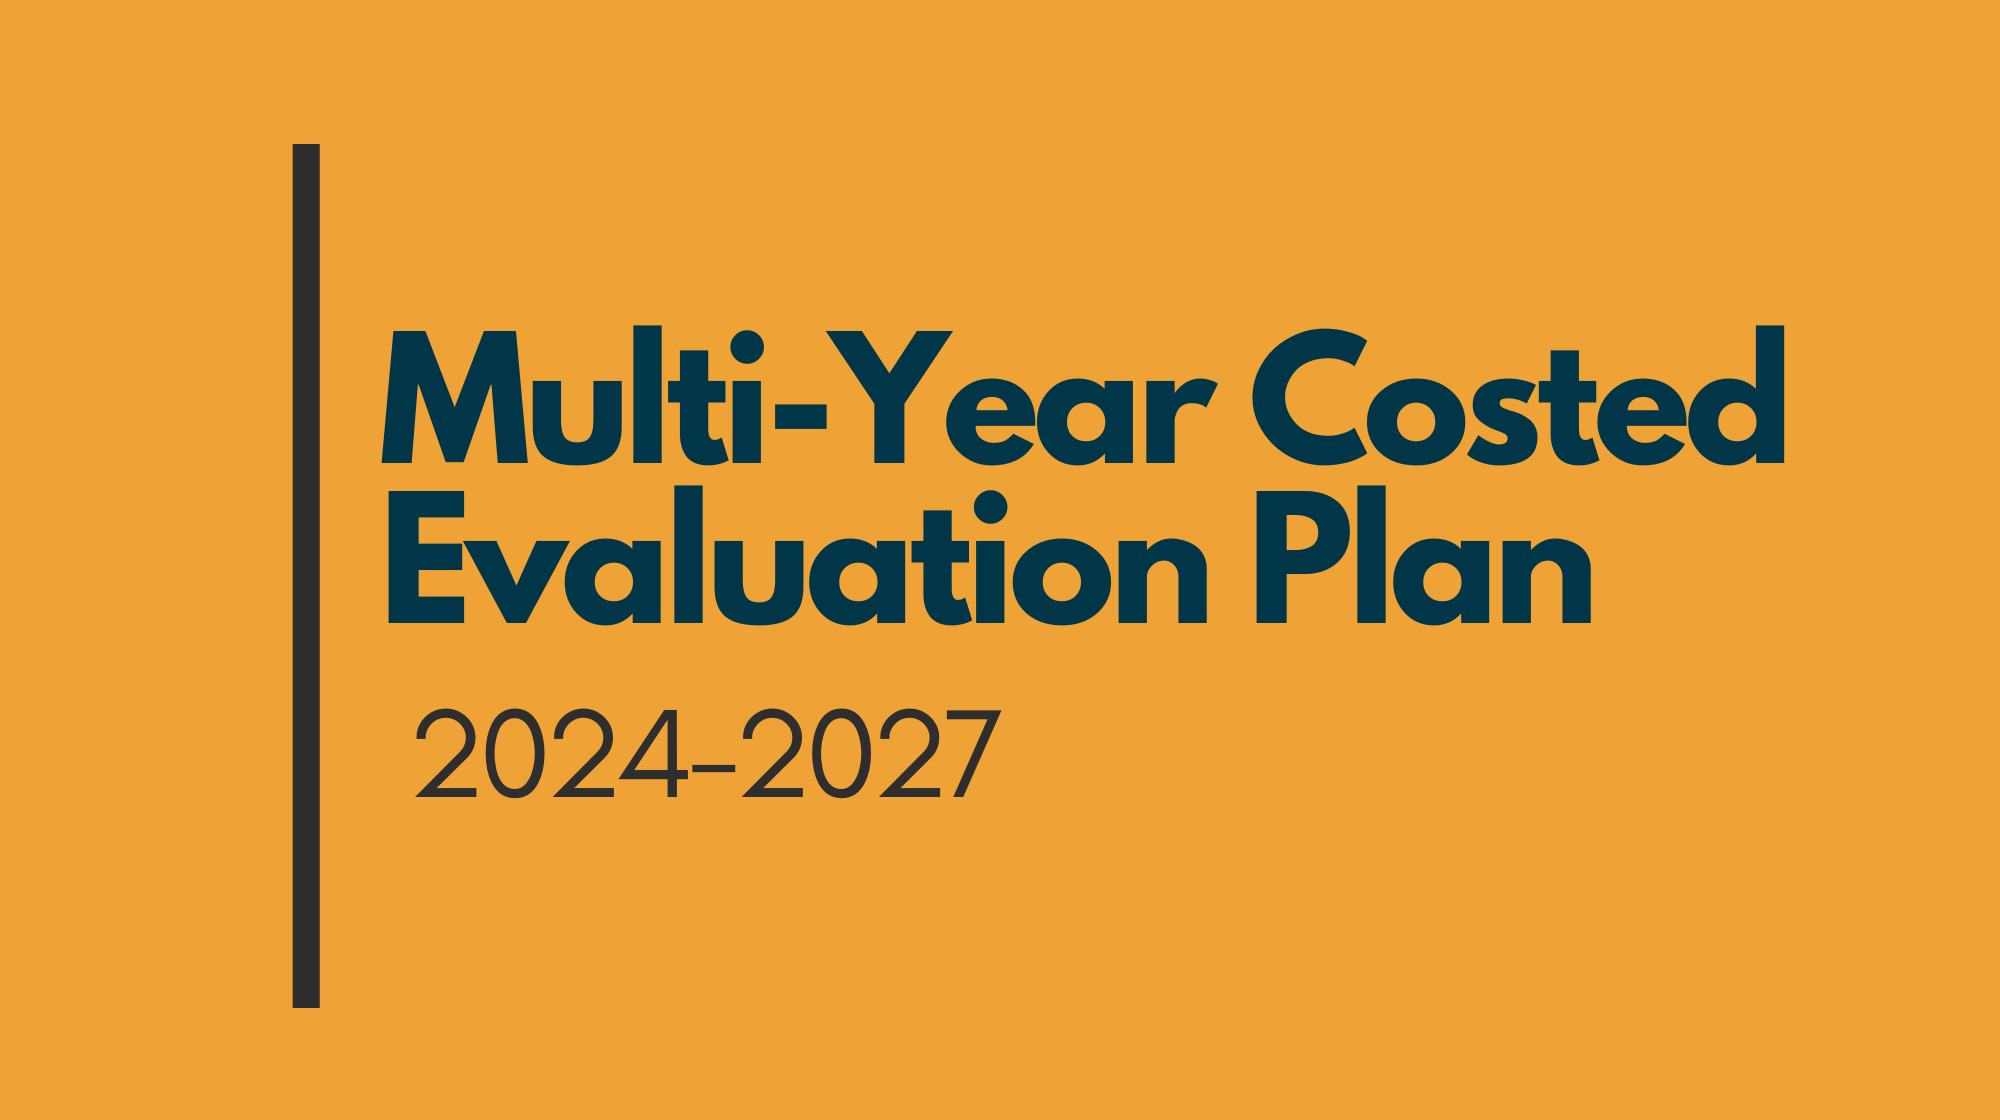 Multi-Year Costed Evaluation Plan, 2024-2027